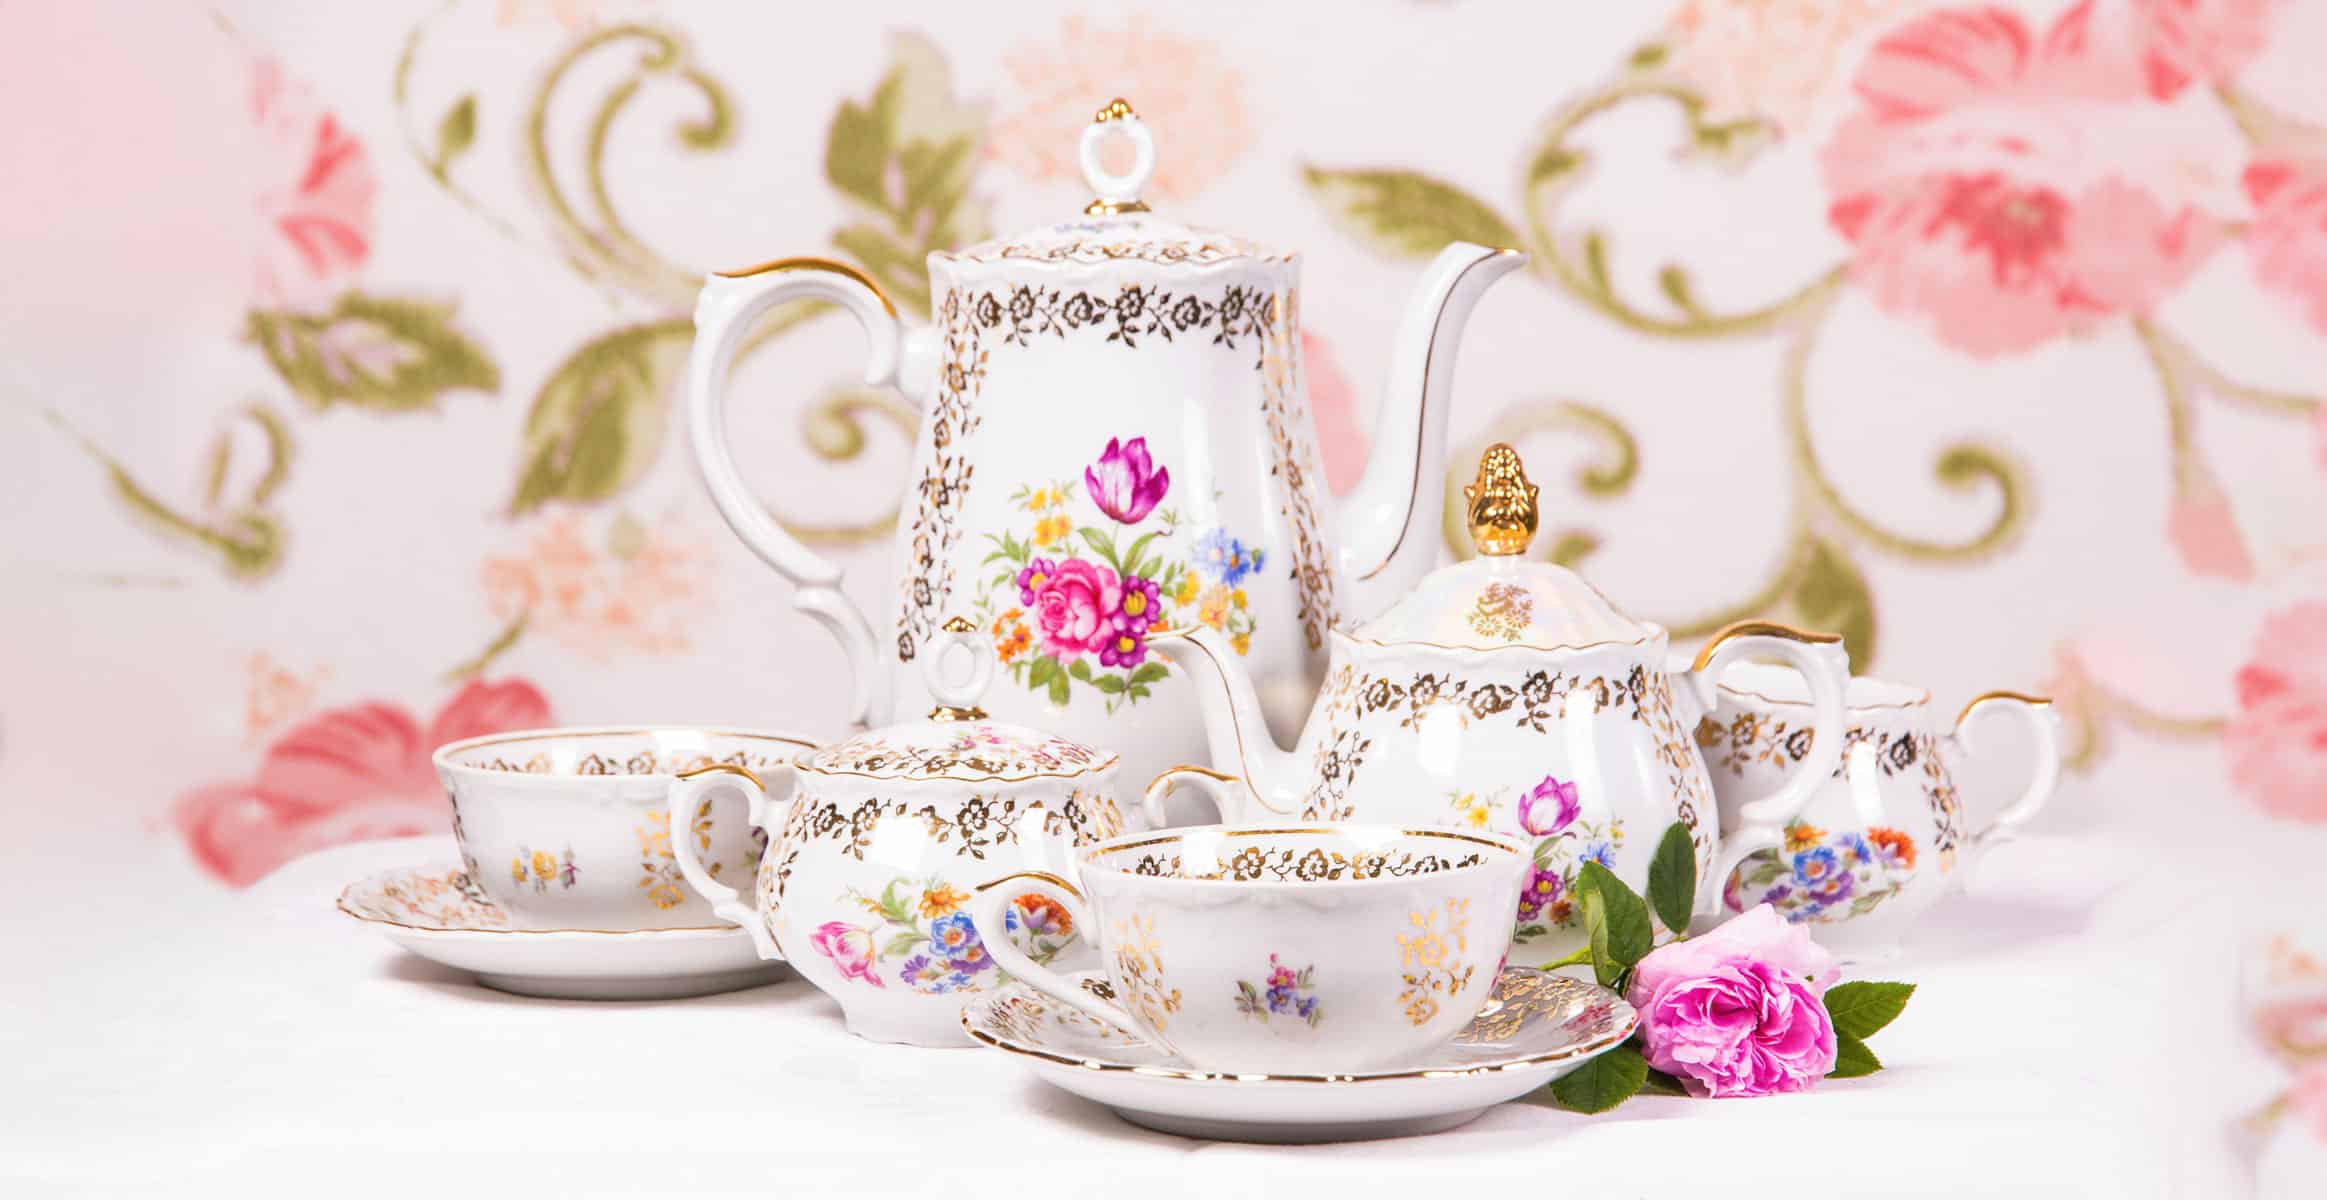 Tea Party, Group Of Objects, Tea - Hot Drink, Afternoon Tea, Order, Antique